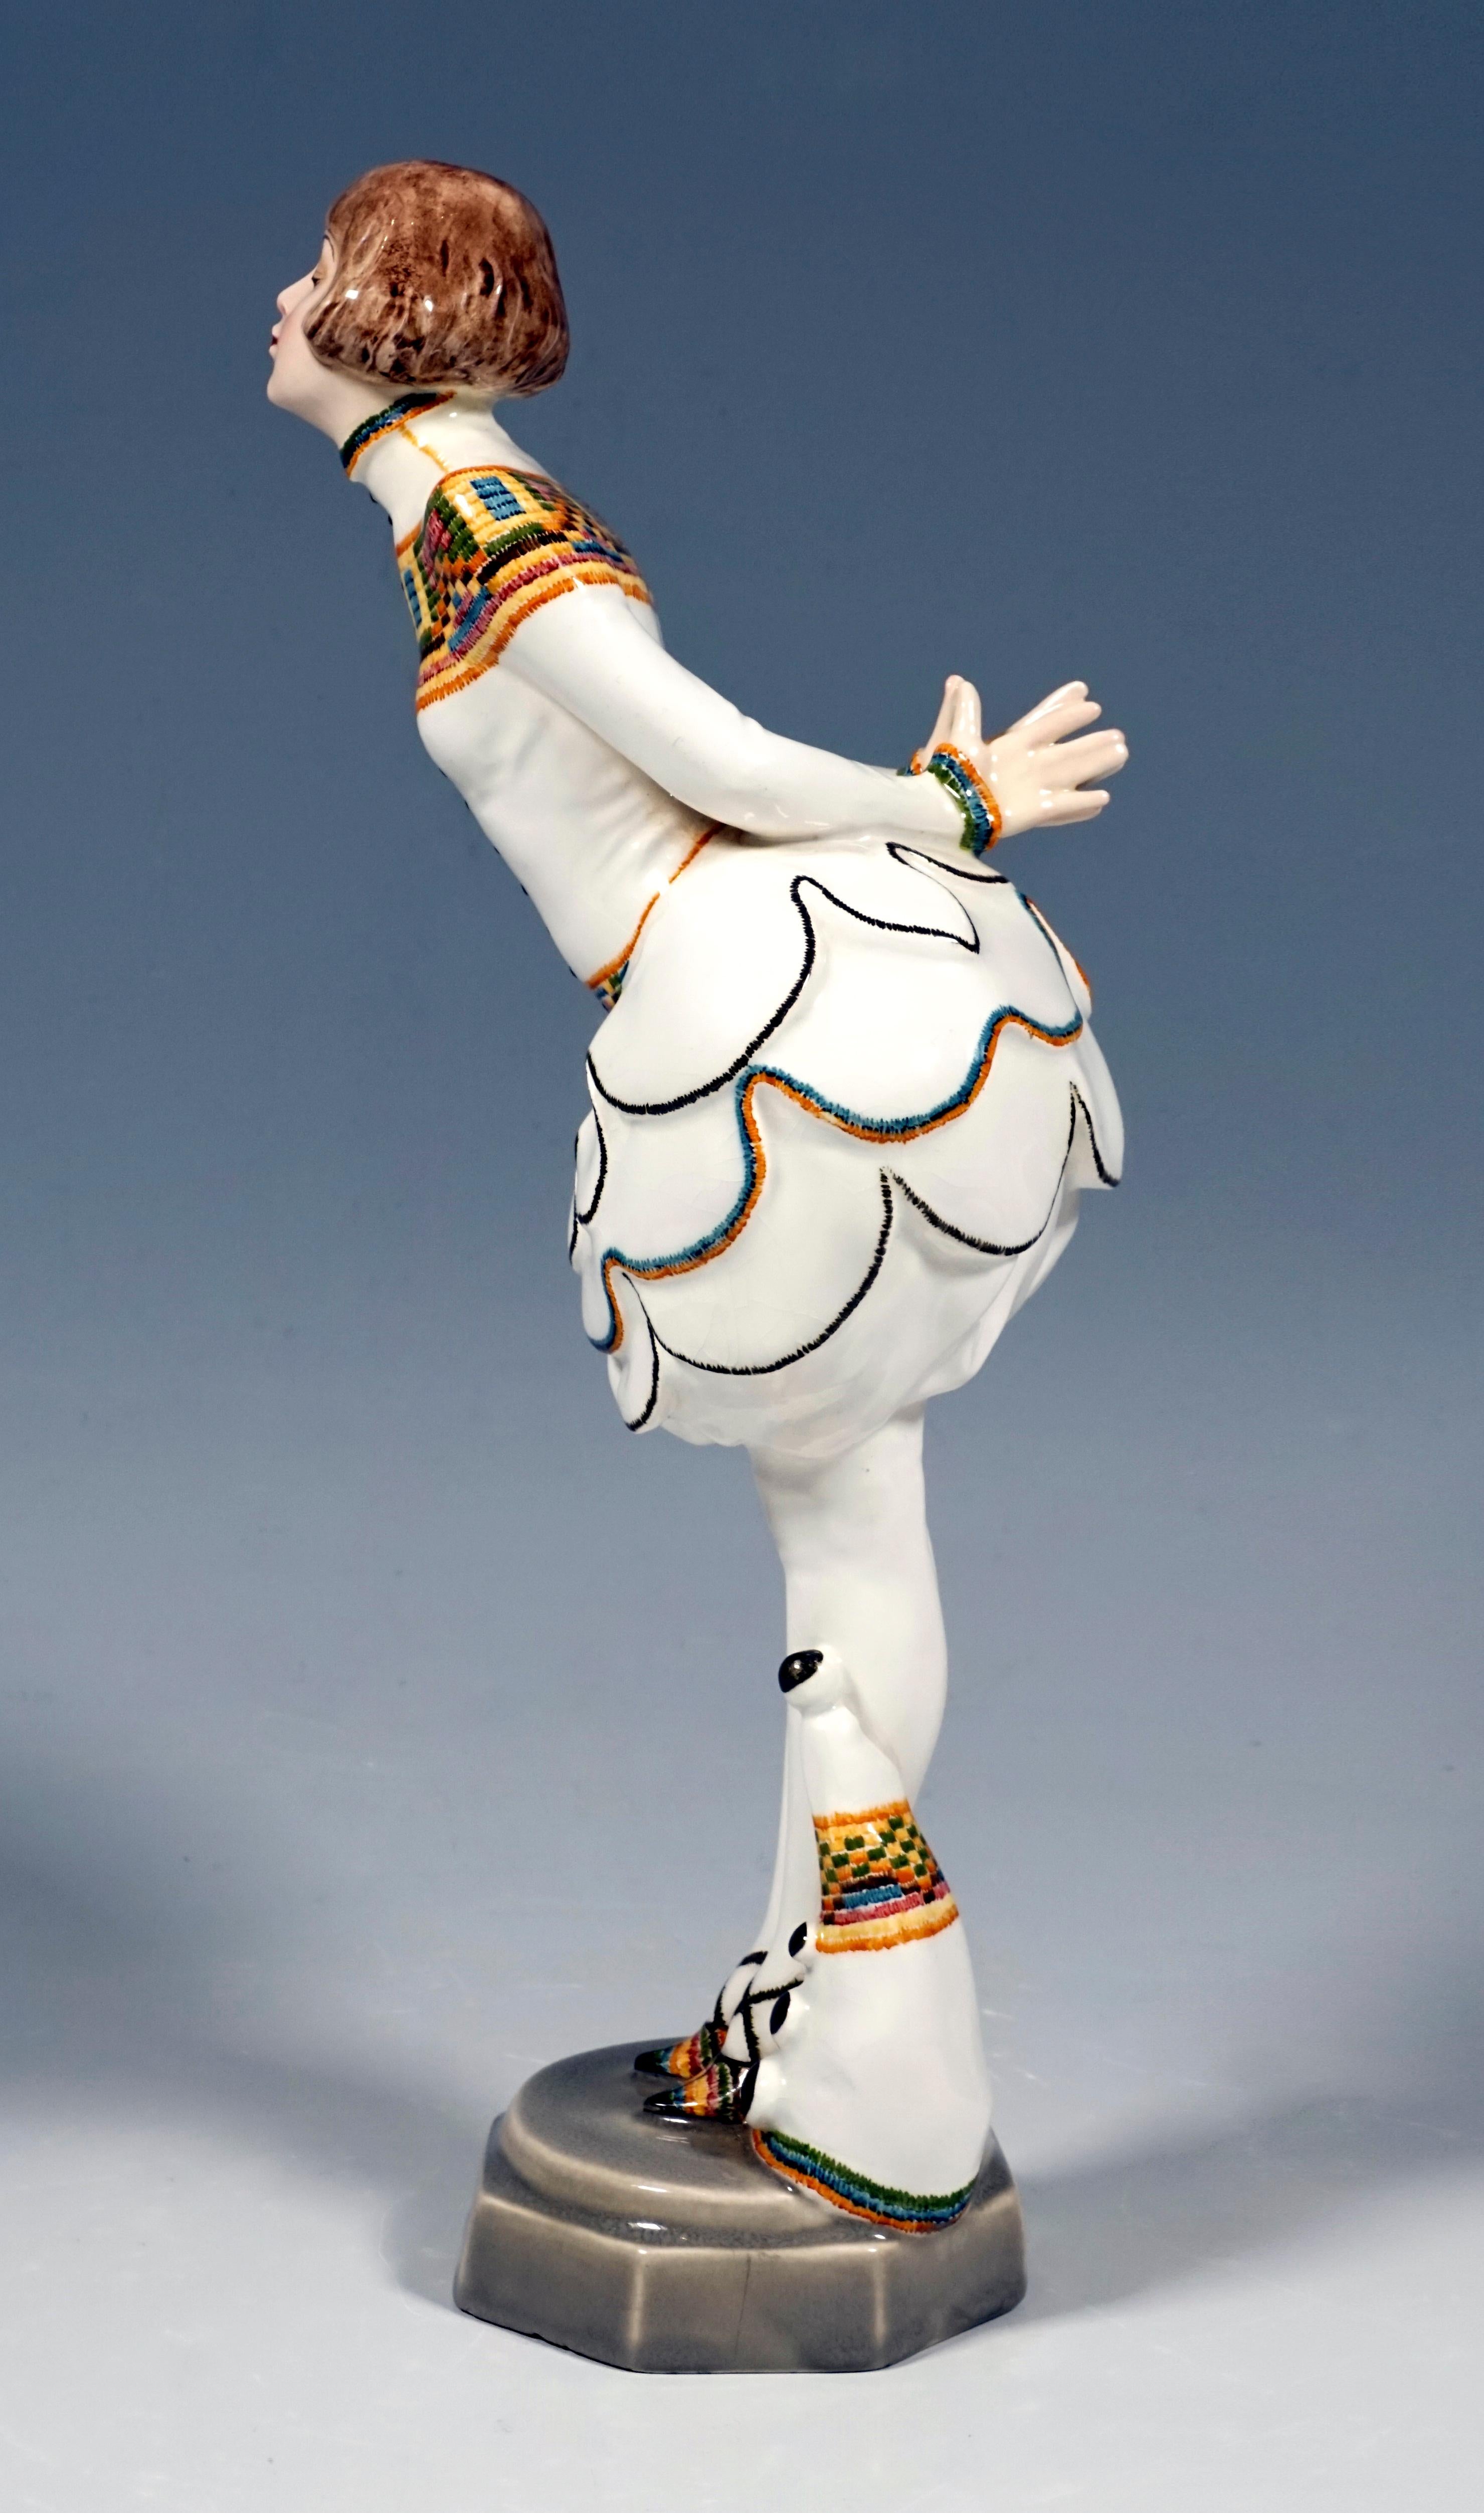 Very Rare Goldscheider Vienna Figurine of the 1920s:
Standing pierrette leaned forward and holding her hands together behind her back, in a white costume with a multi-layered, pine-cone-like balloon skirt, with partly colorfully embroidered top and